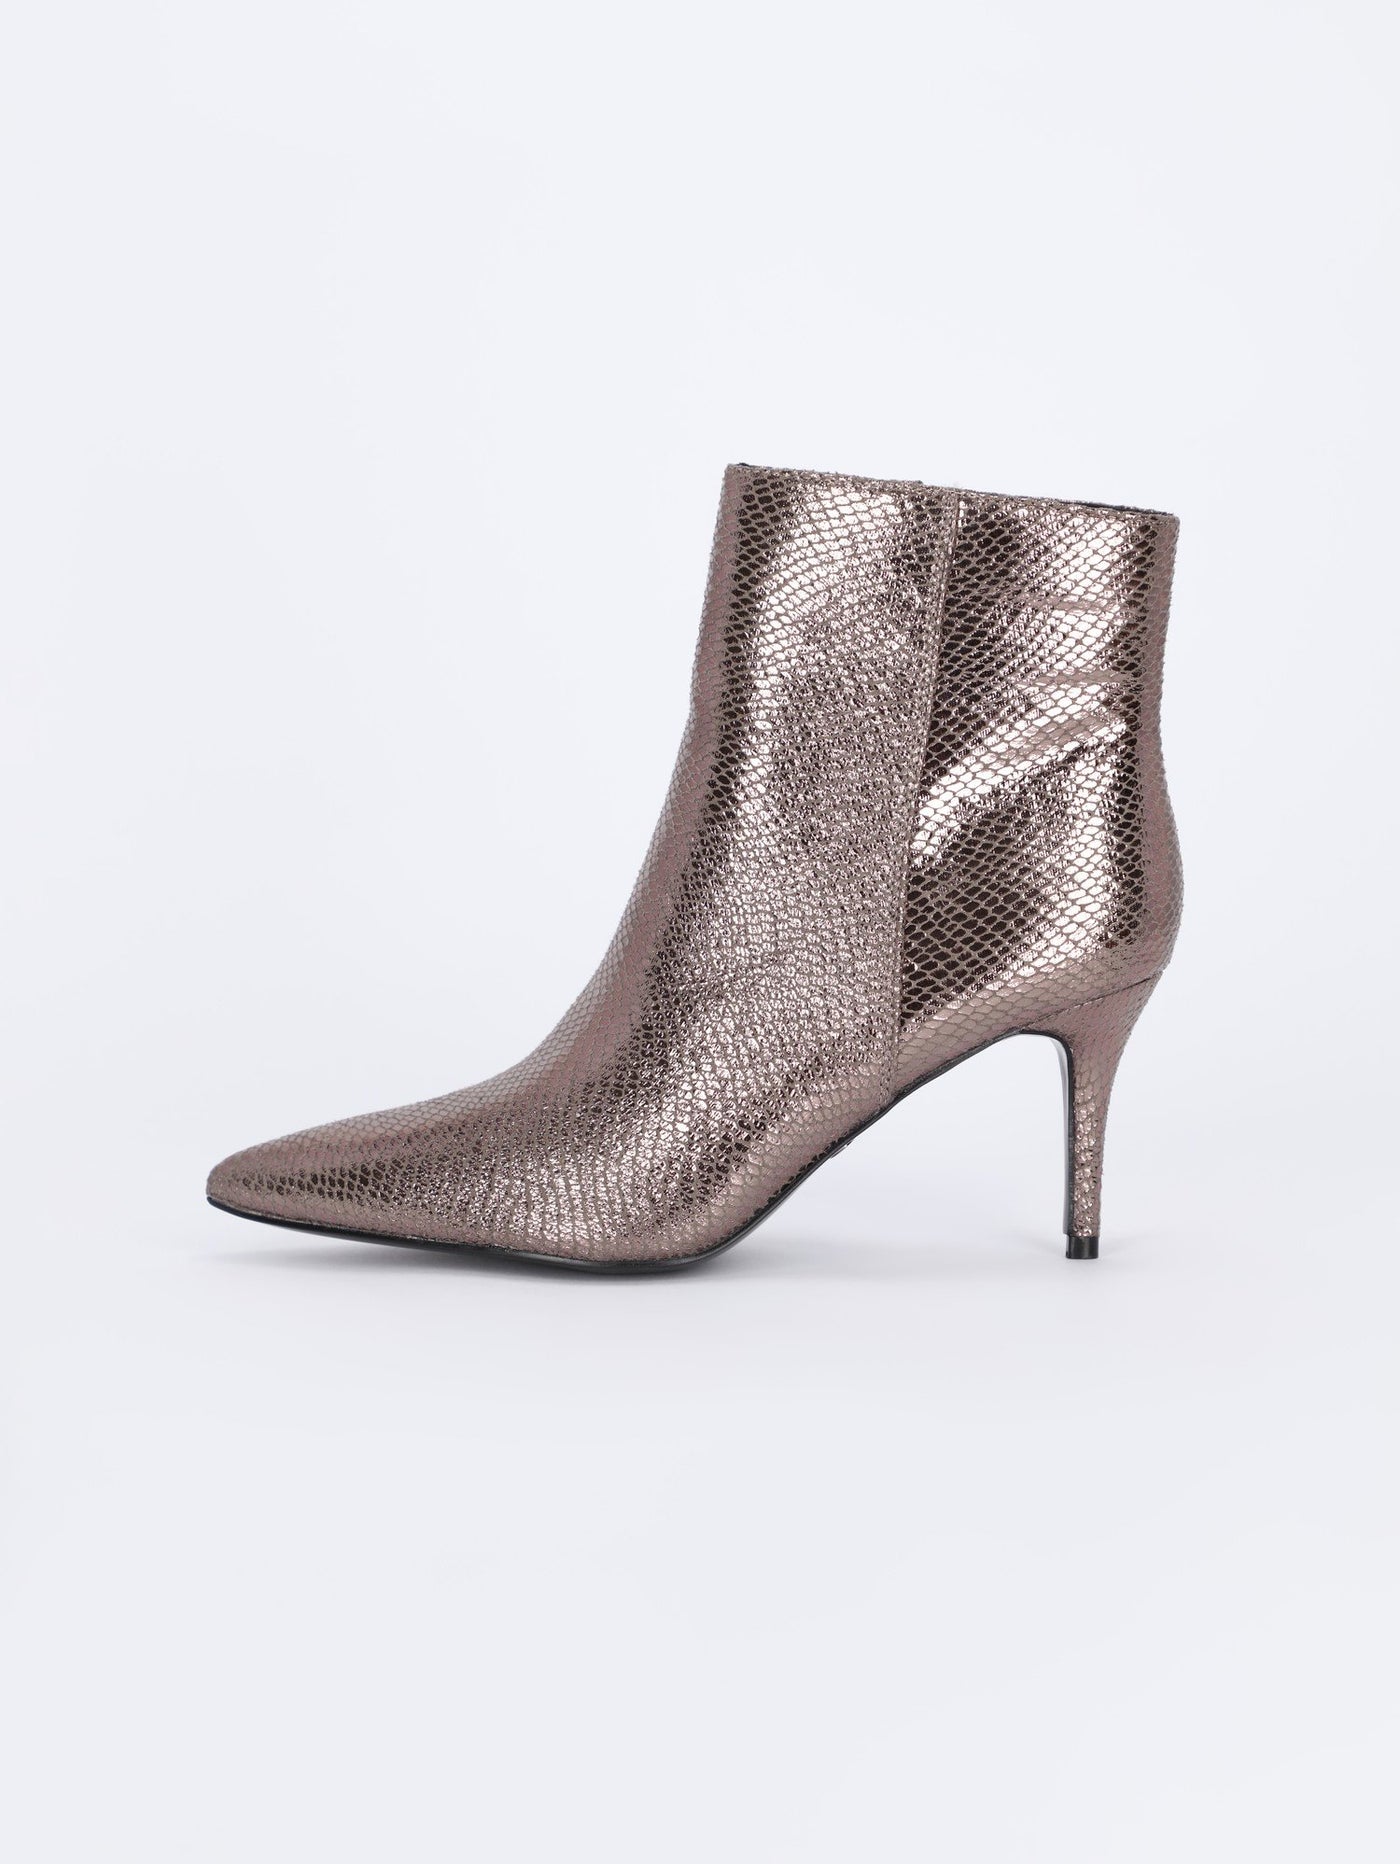 Glossy Lizard-Effect Ankle Boots with Stiletto Heels